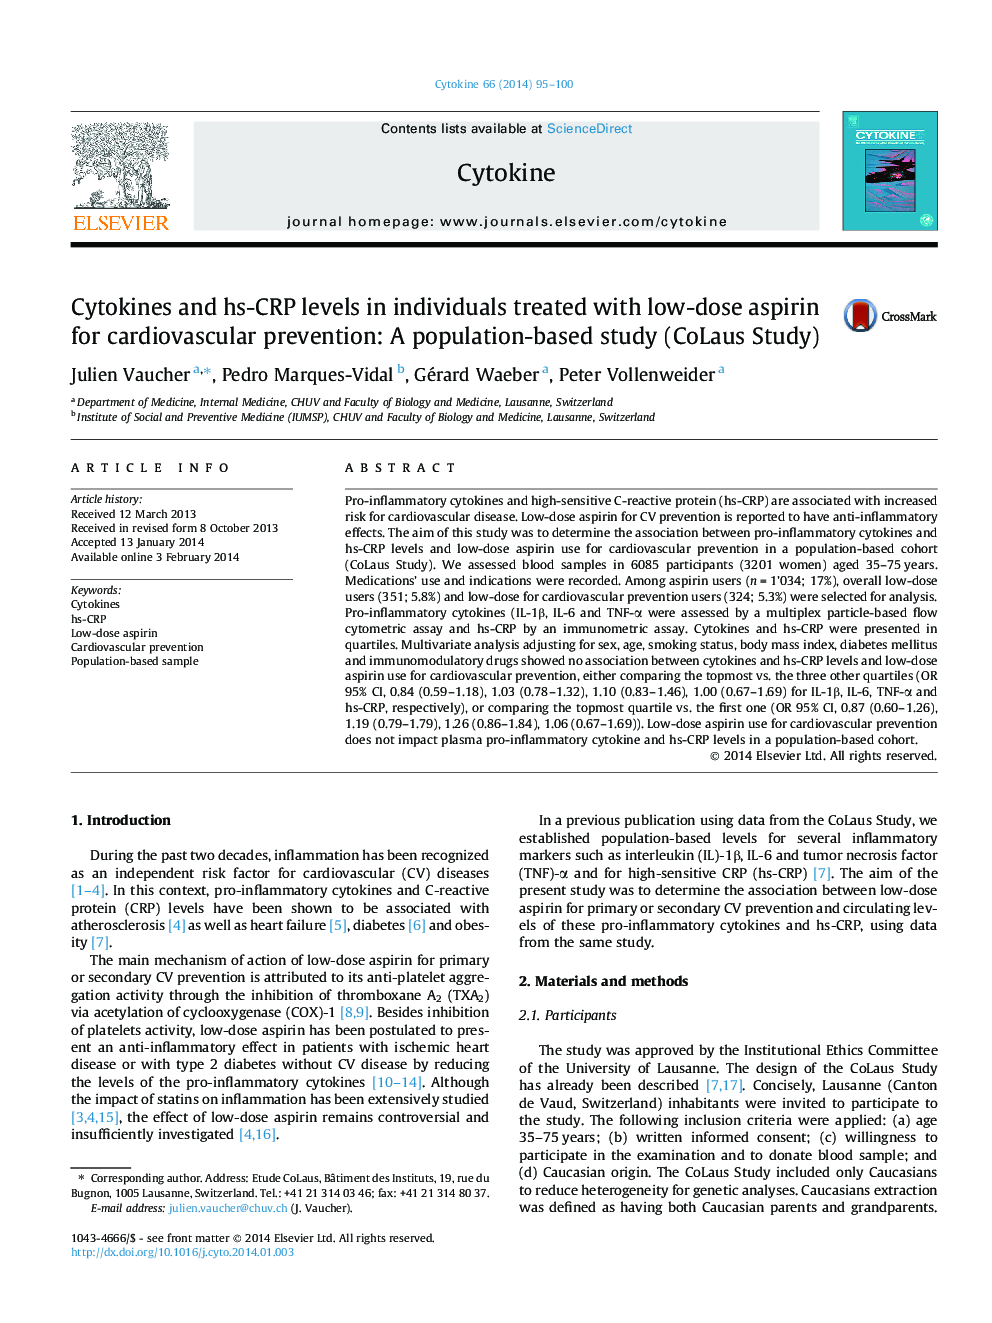 Cytokines and hs-CRP levels in individuals treated with low-dose aspirin for cardiovascular prevention: A population-based study (CoLaus Study)